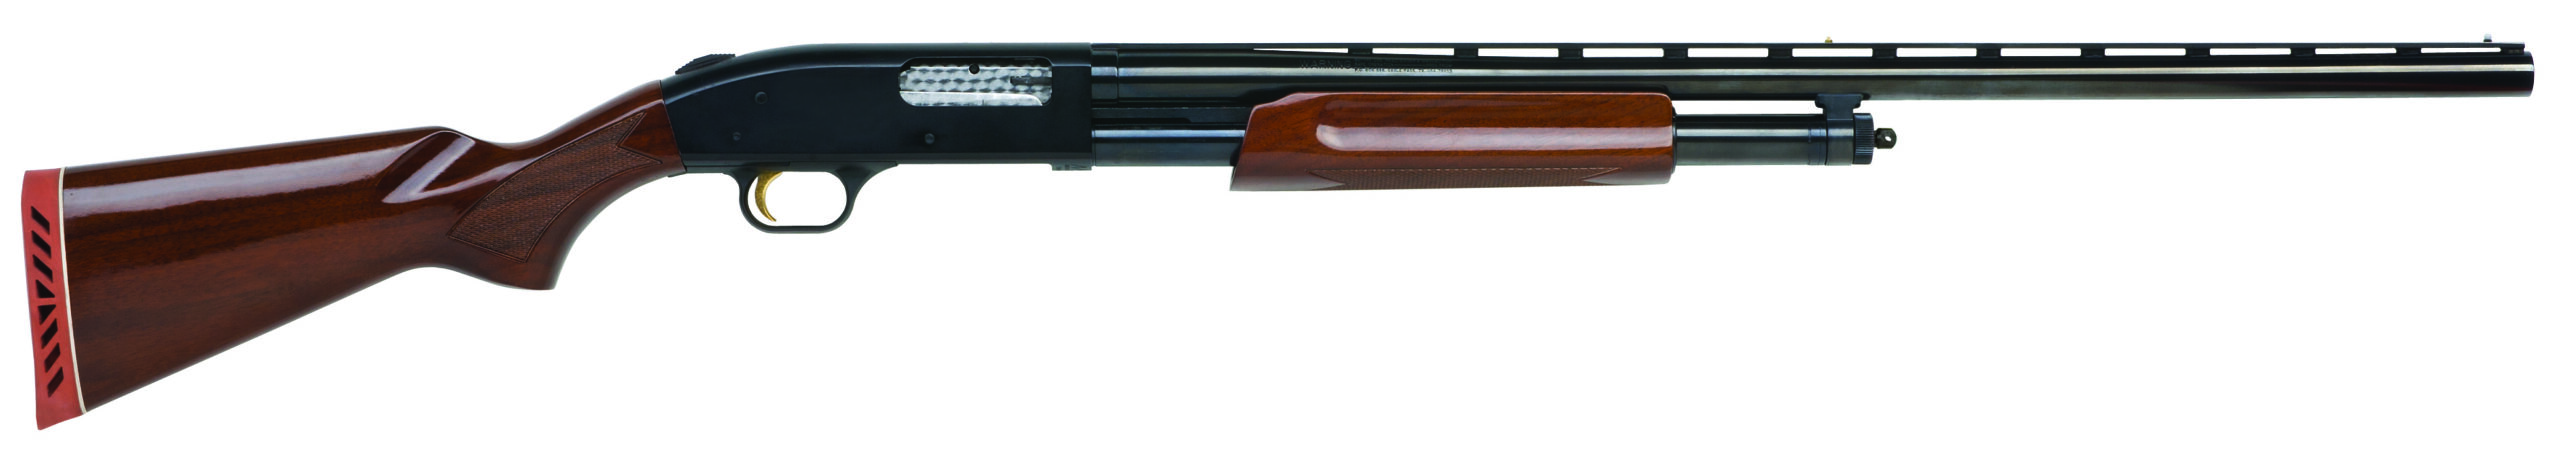 Mossberg's 500 is a rugged pump.